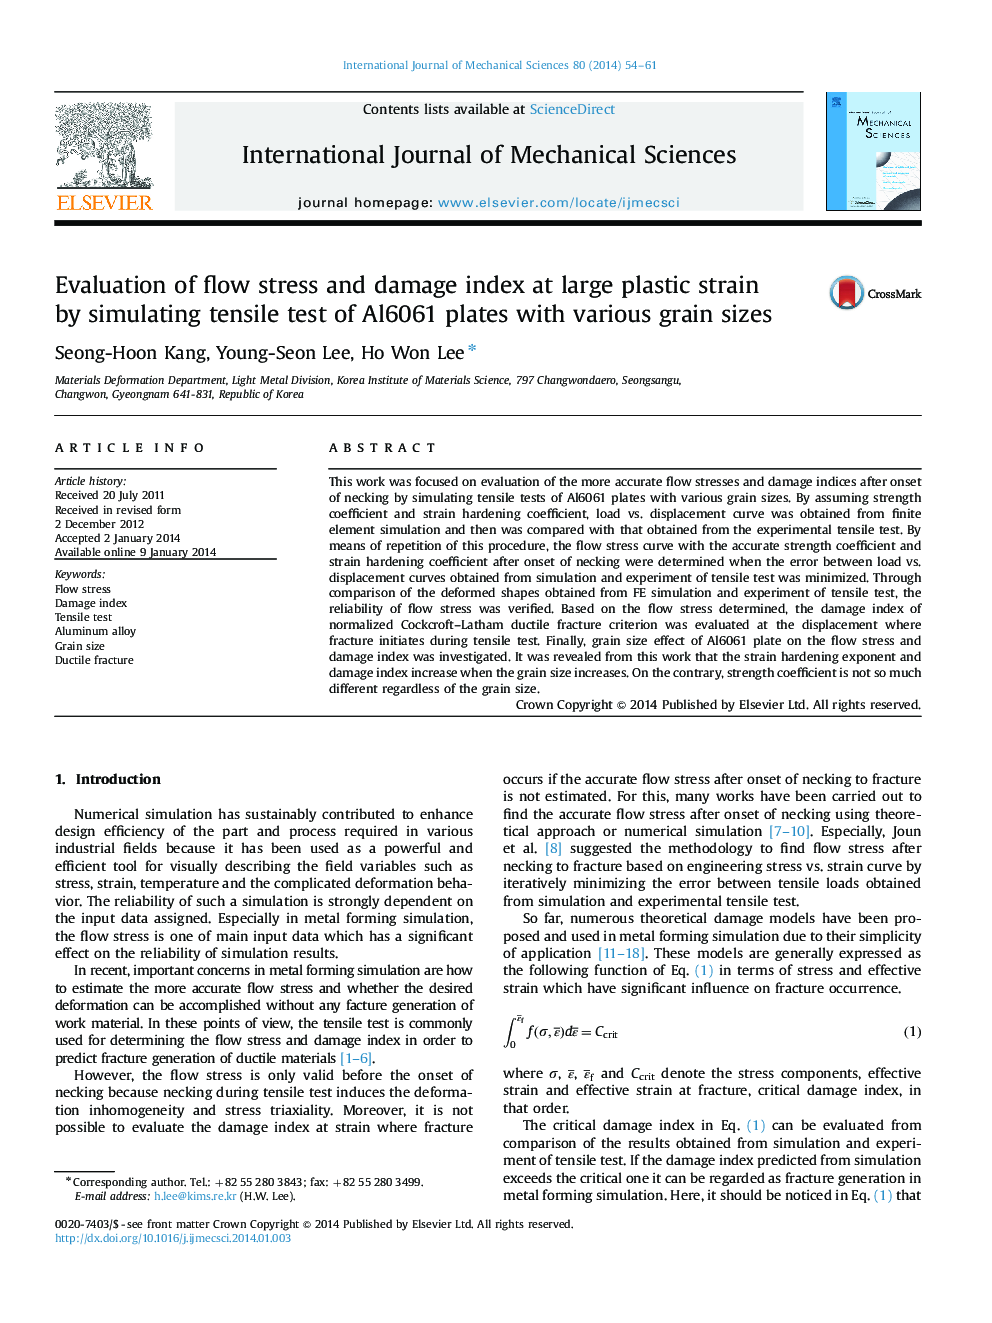 Evaluation of flow stress and damage index at large plastic strain by simulating tensile test of Al6061 plates with various grain sizes